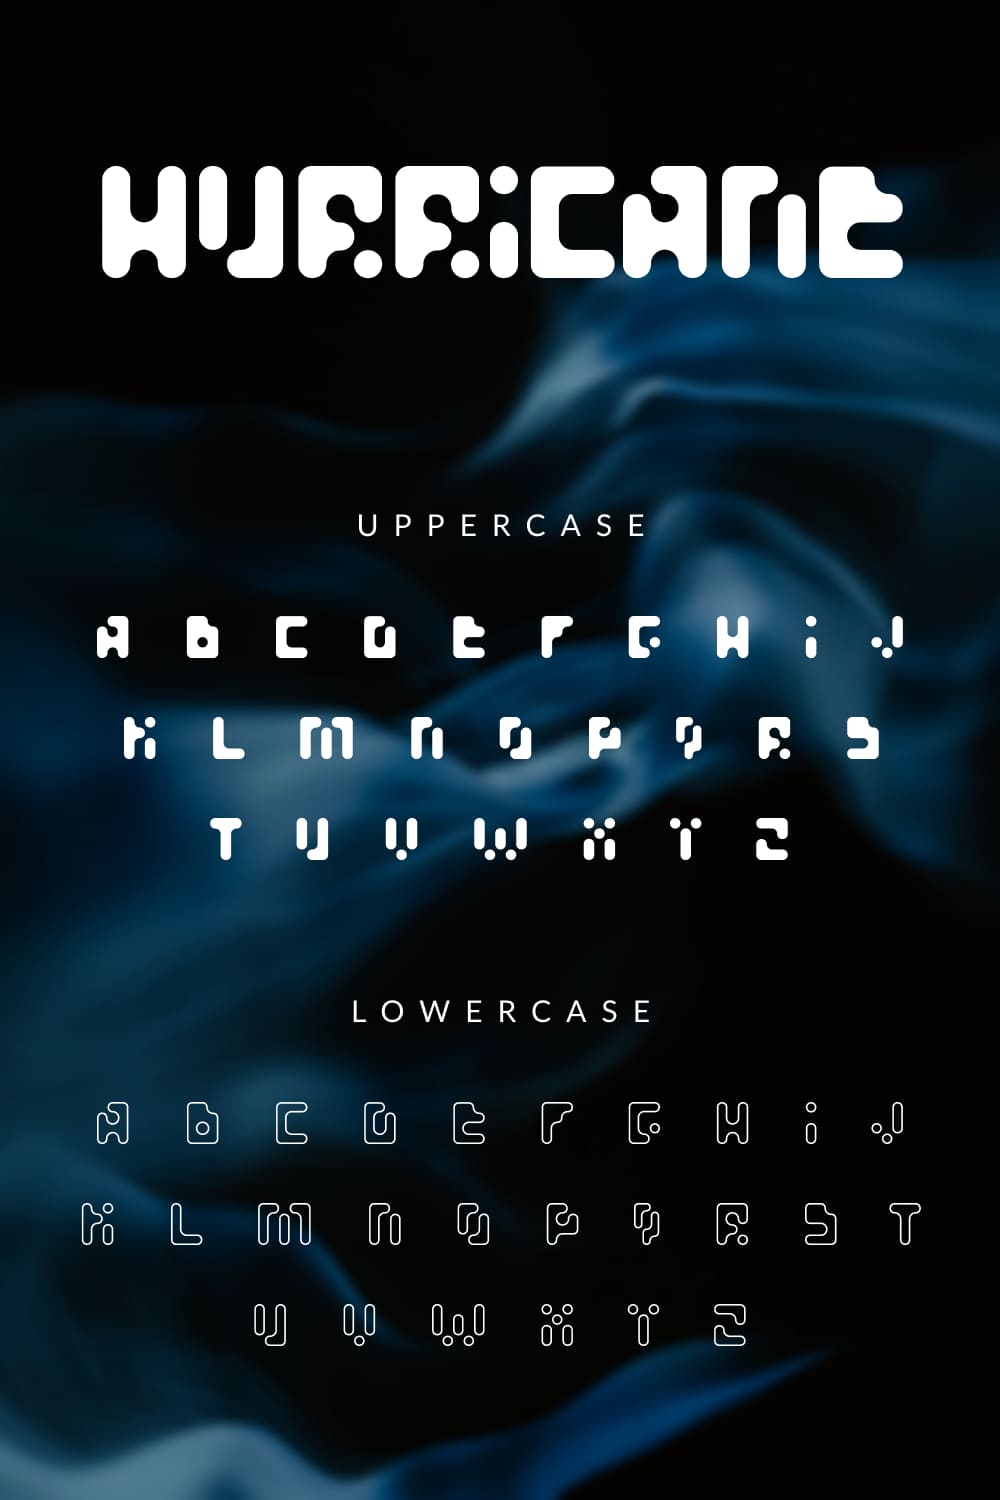 Uppercase and Lowercase.